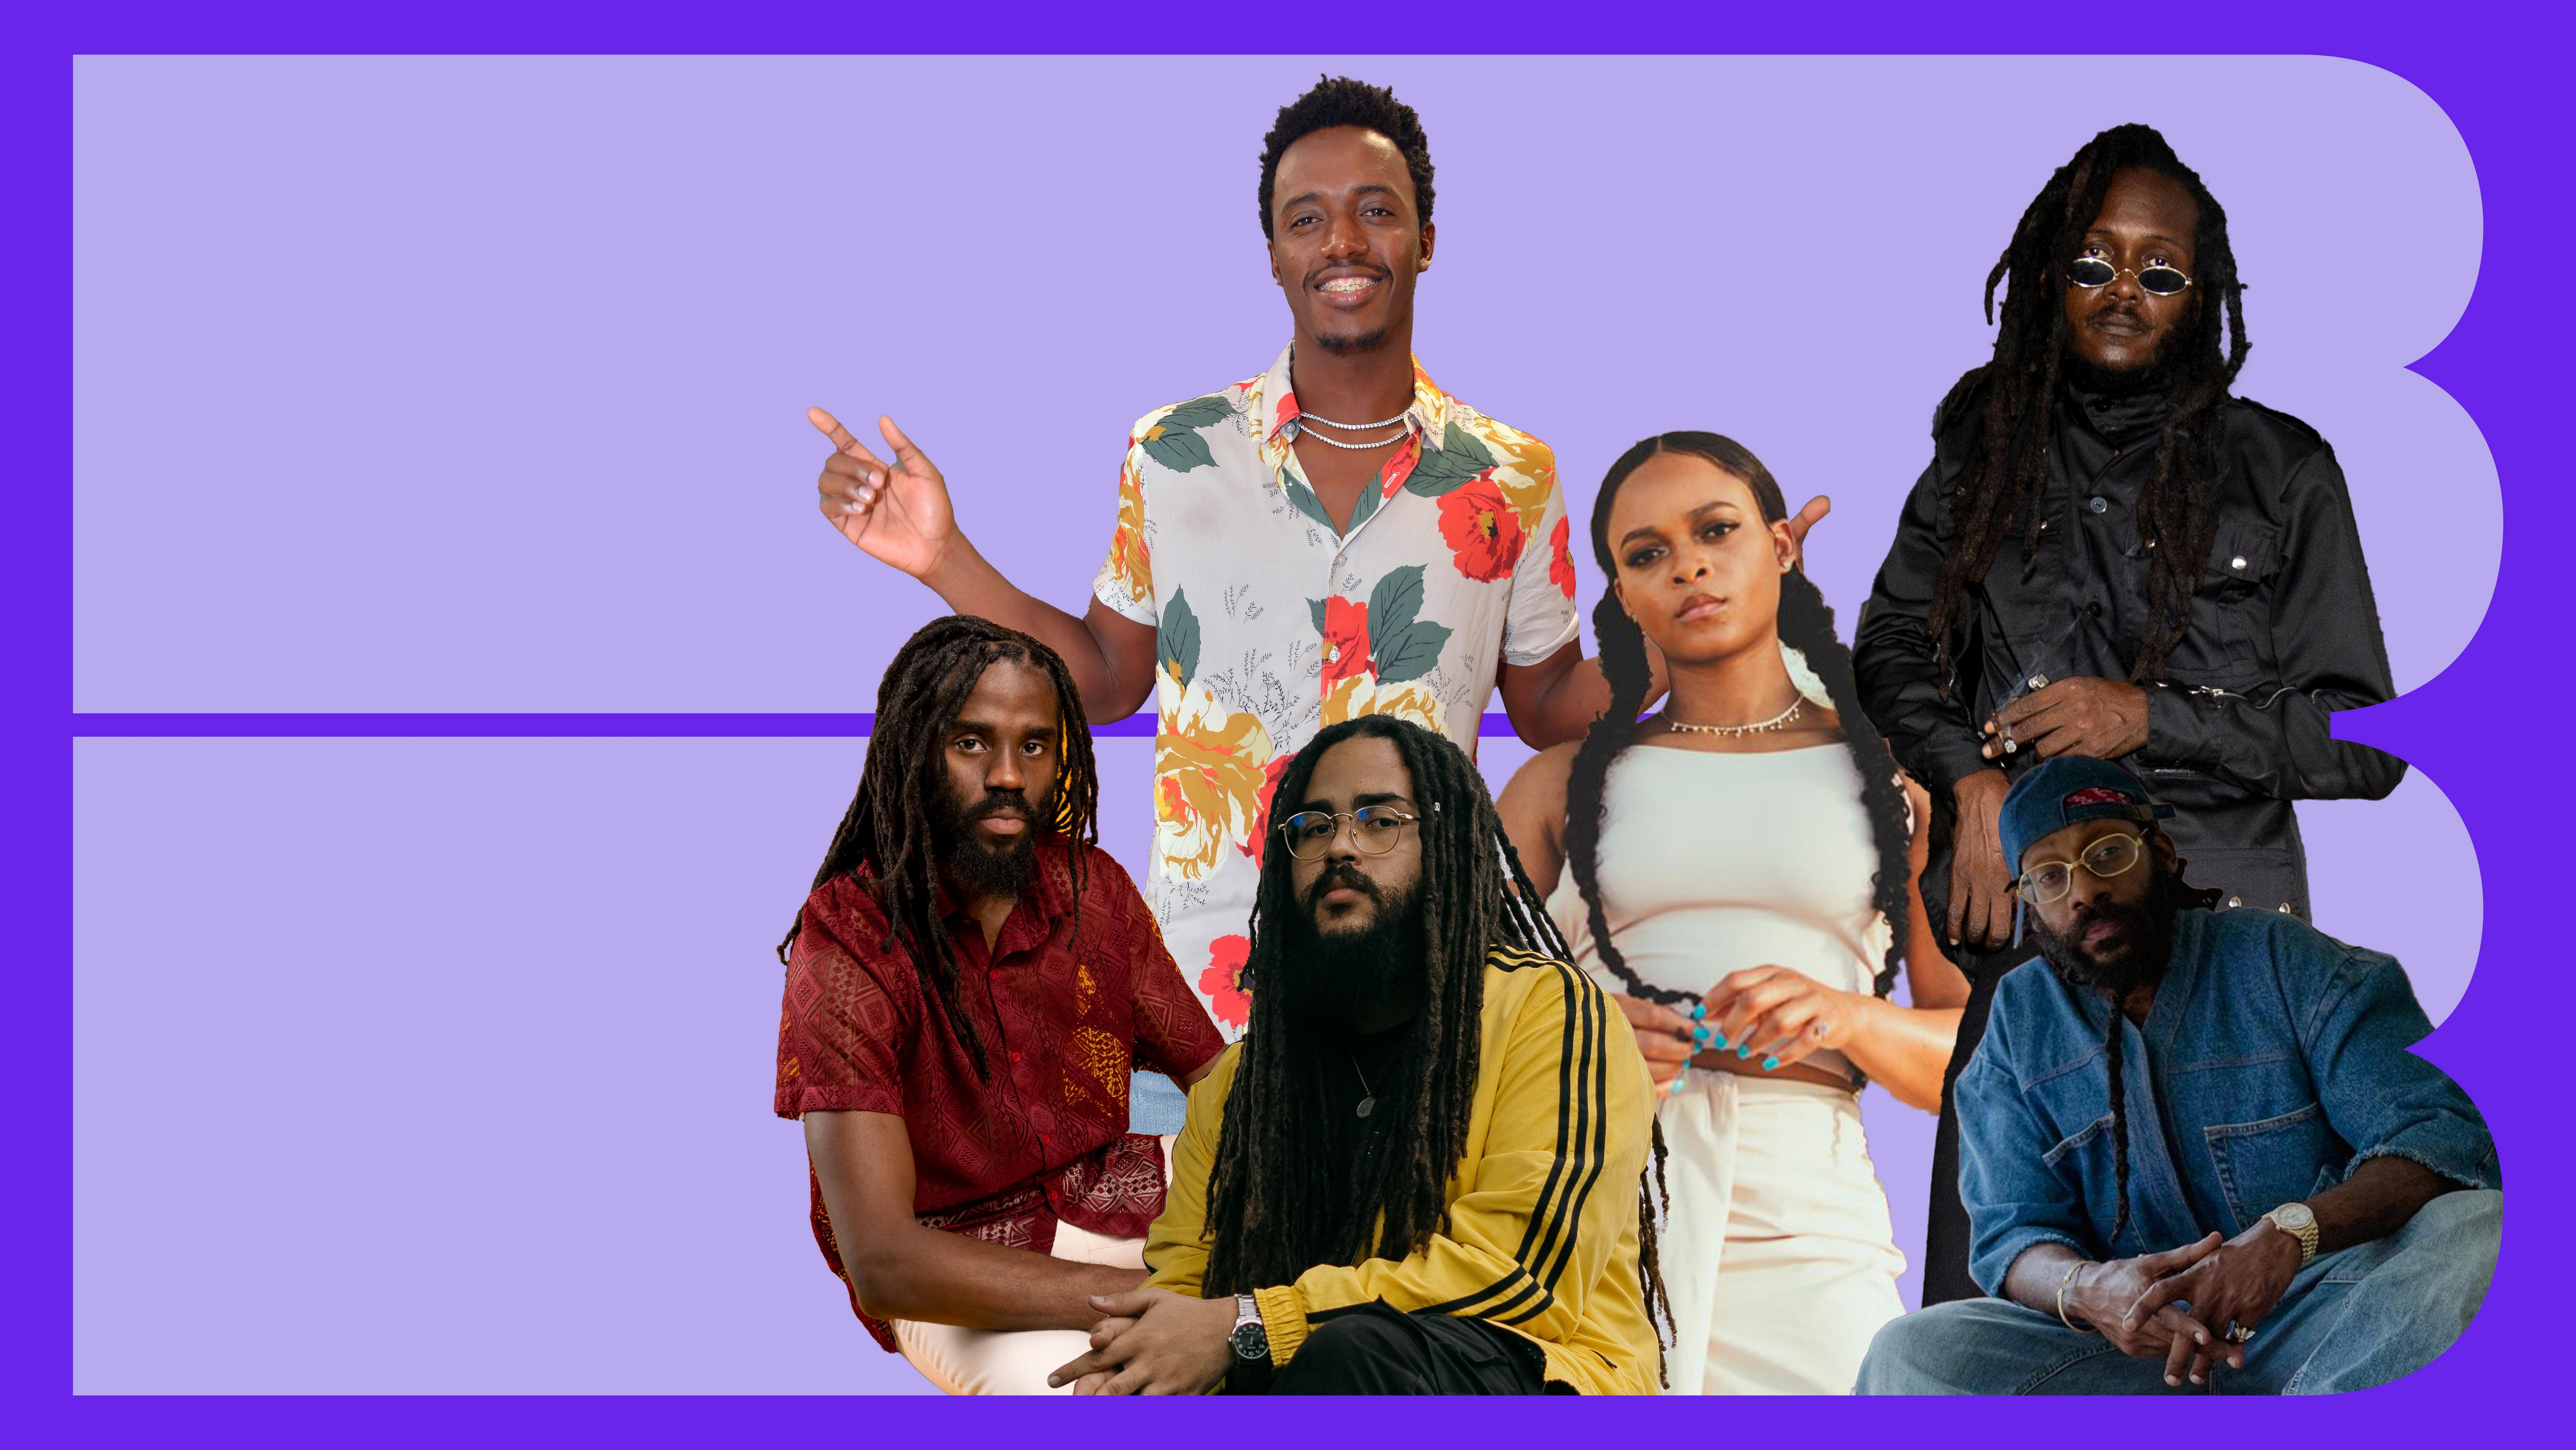 Hector "Roots" Lewis, Romain Virgo, Iotosh, Lila Iké, Samory I and Tarrus Riley in collage